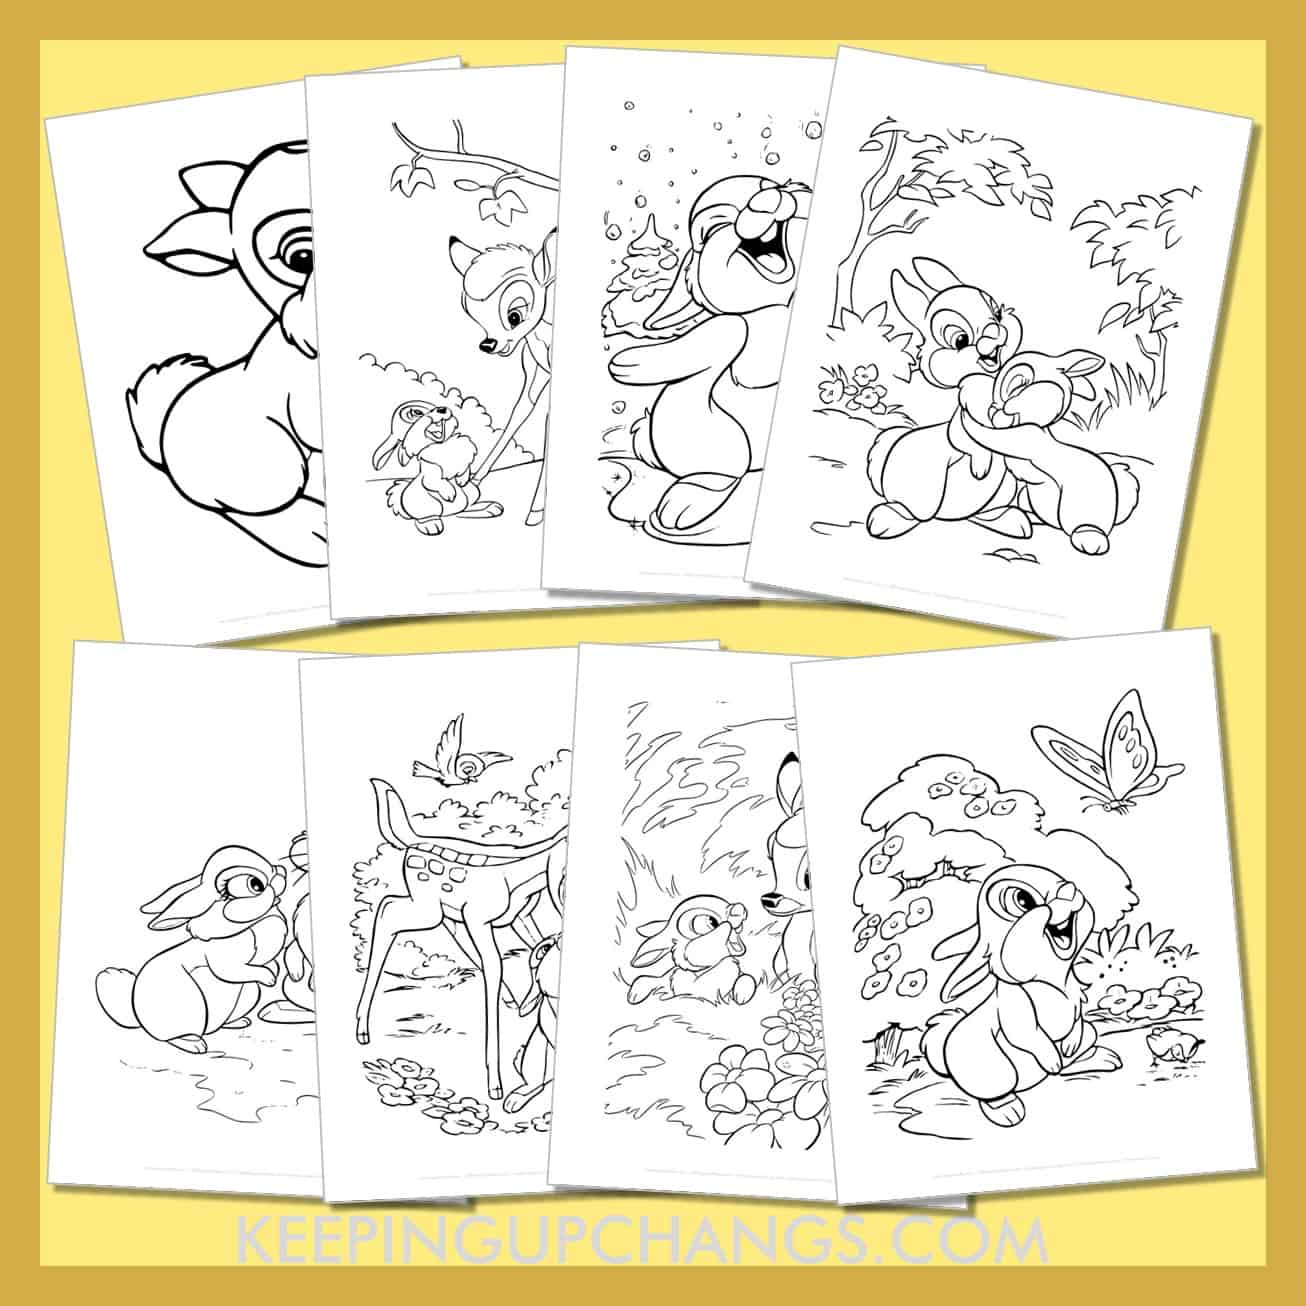 free thumper pictures to color for toddlers, kids, adults.